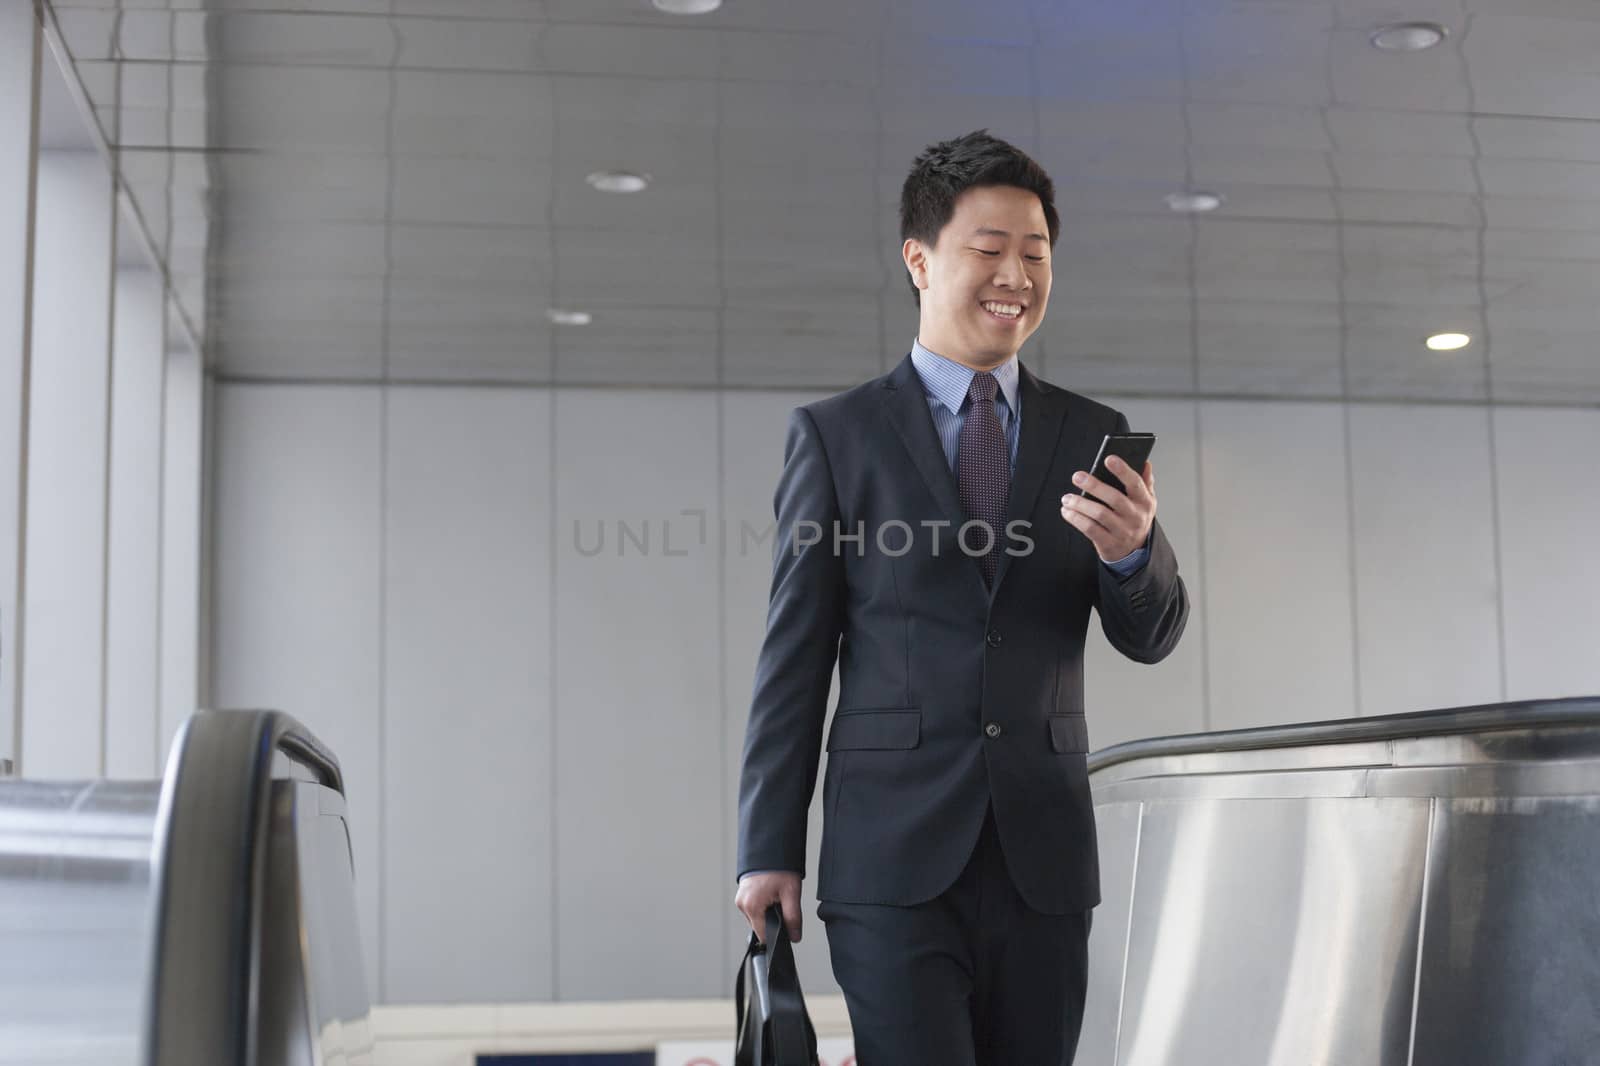 Smiling businessman coming up the escalator and looking down at his phone